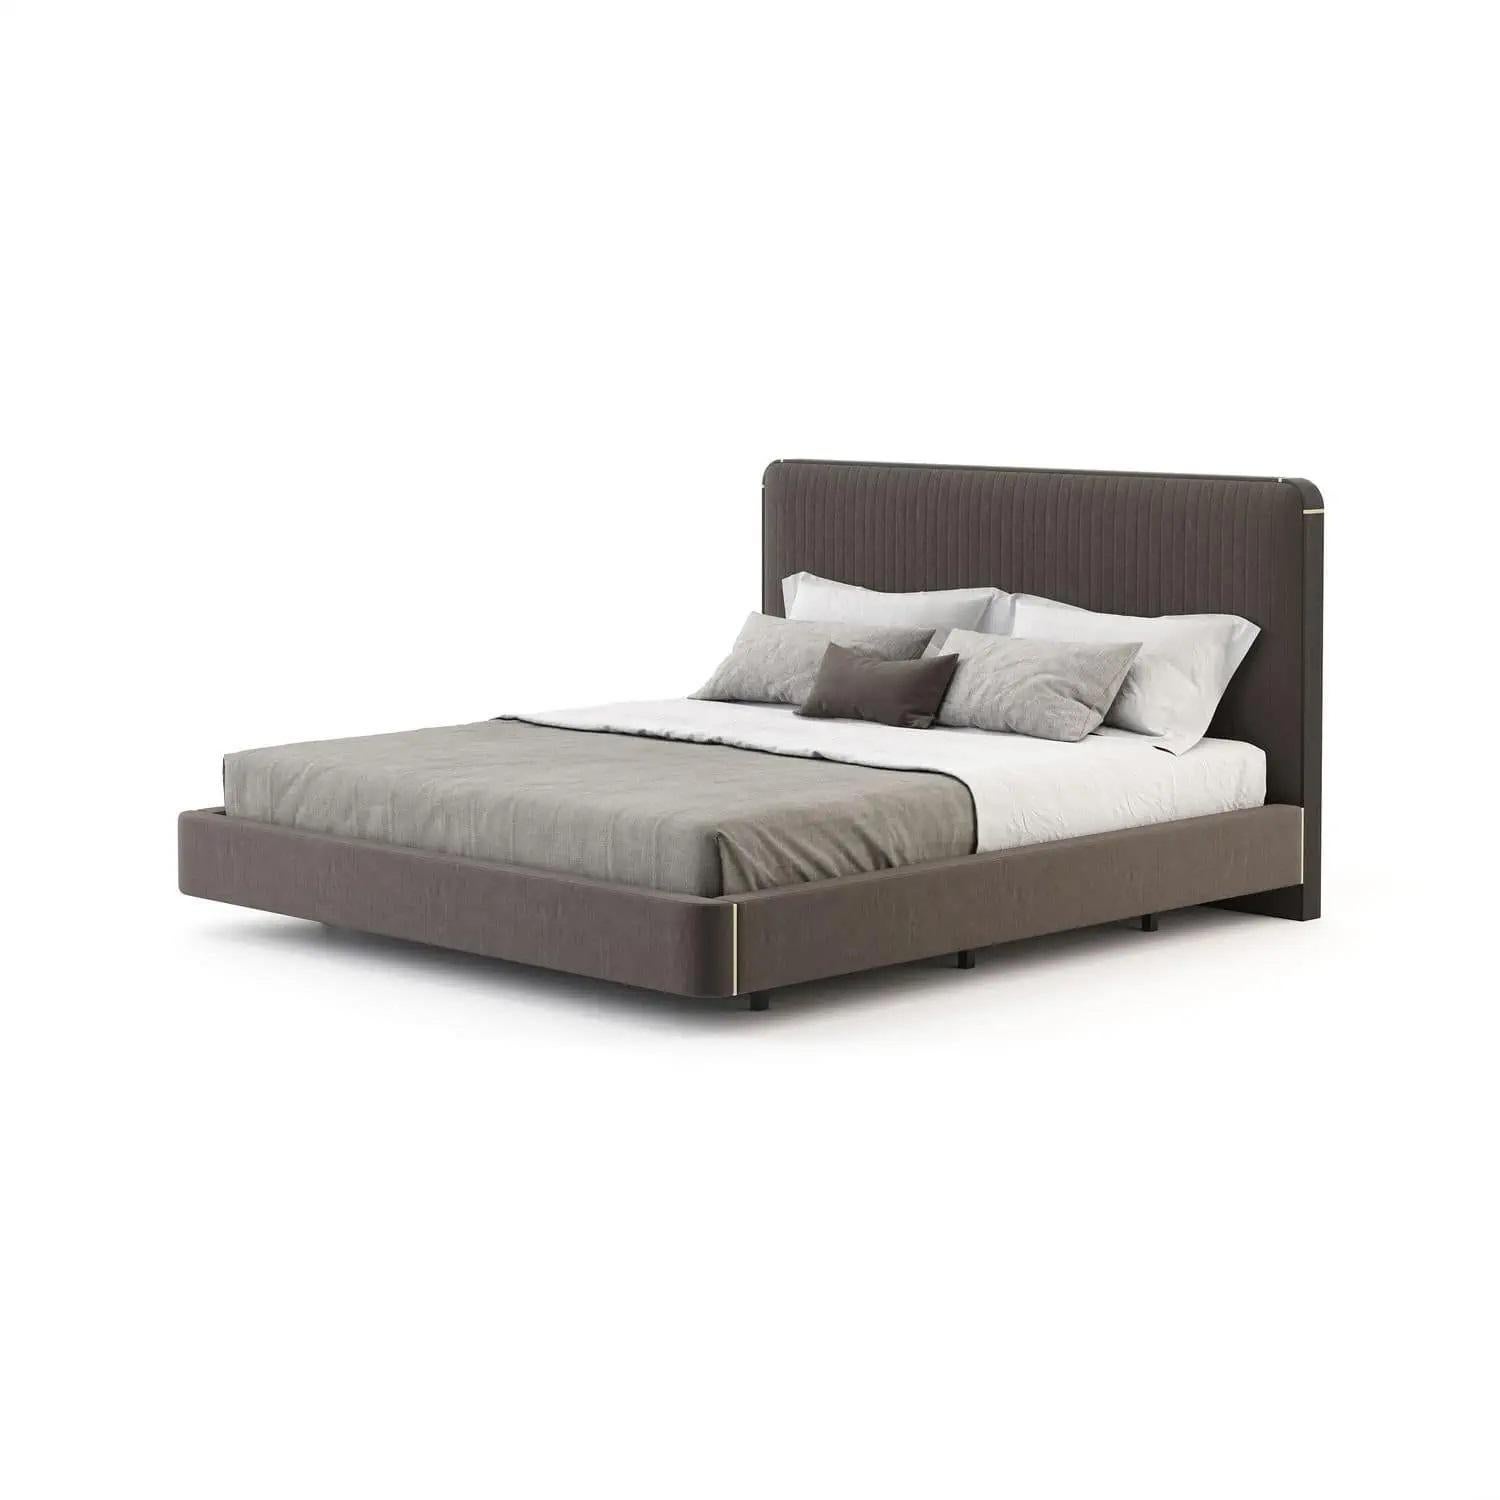 American King Size Bed Offered in Velvet, Wood Veneer and Metal Details For Sale 1